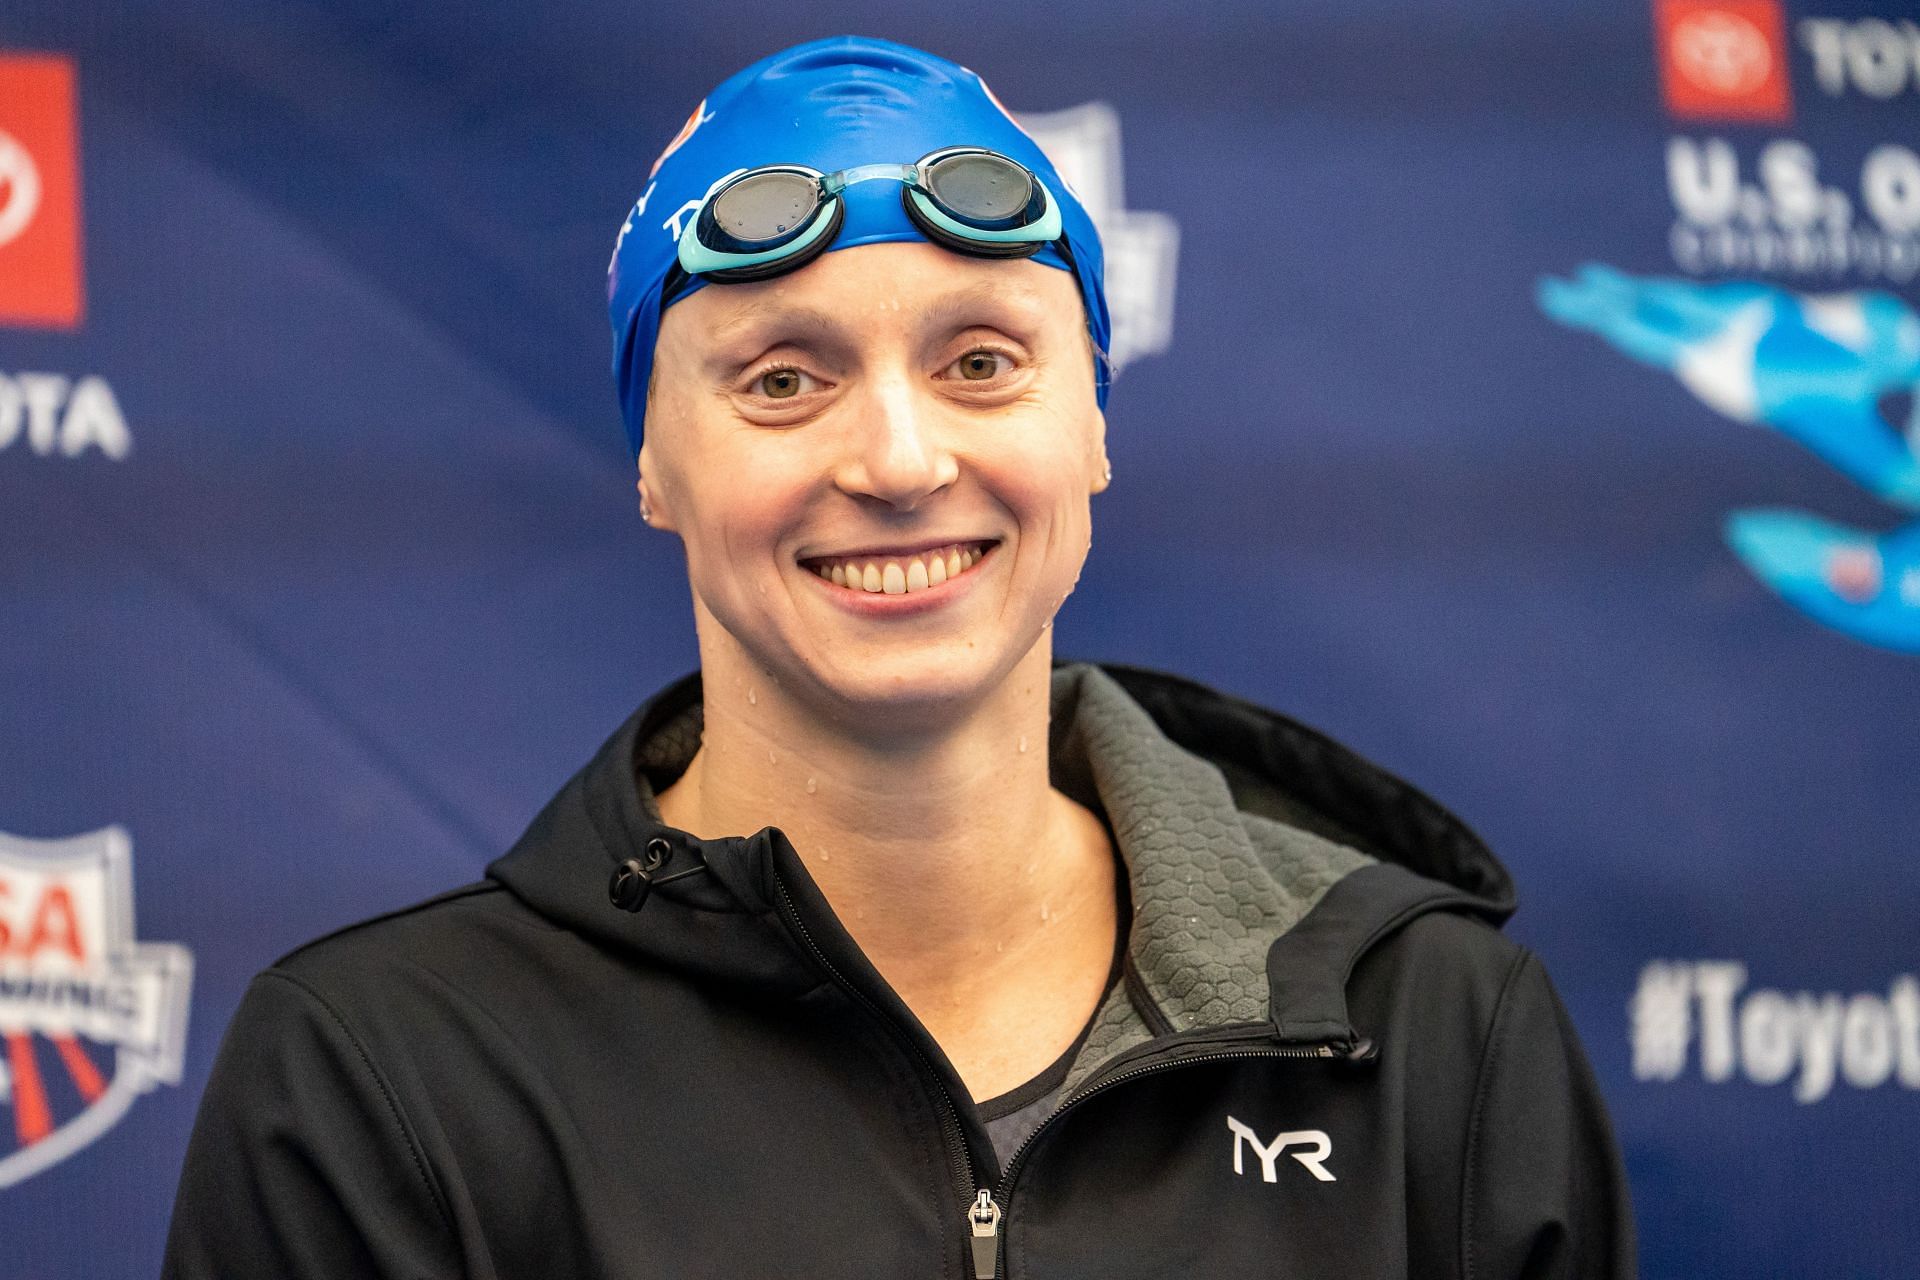 Katie Ledecky at the Toyota US Open - Day 2